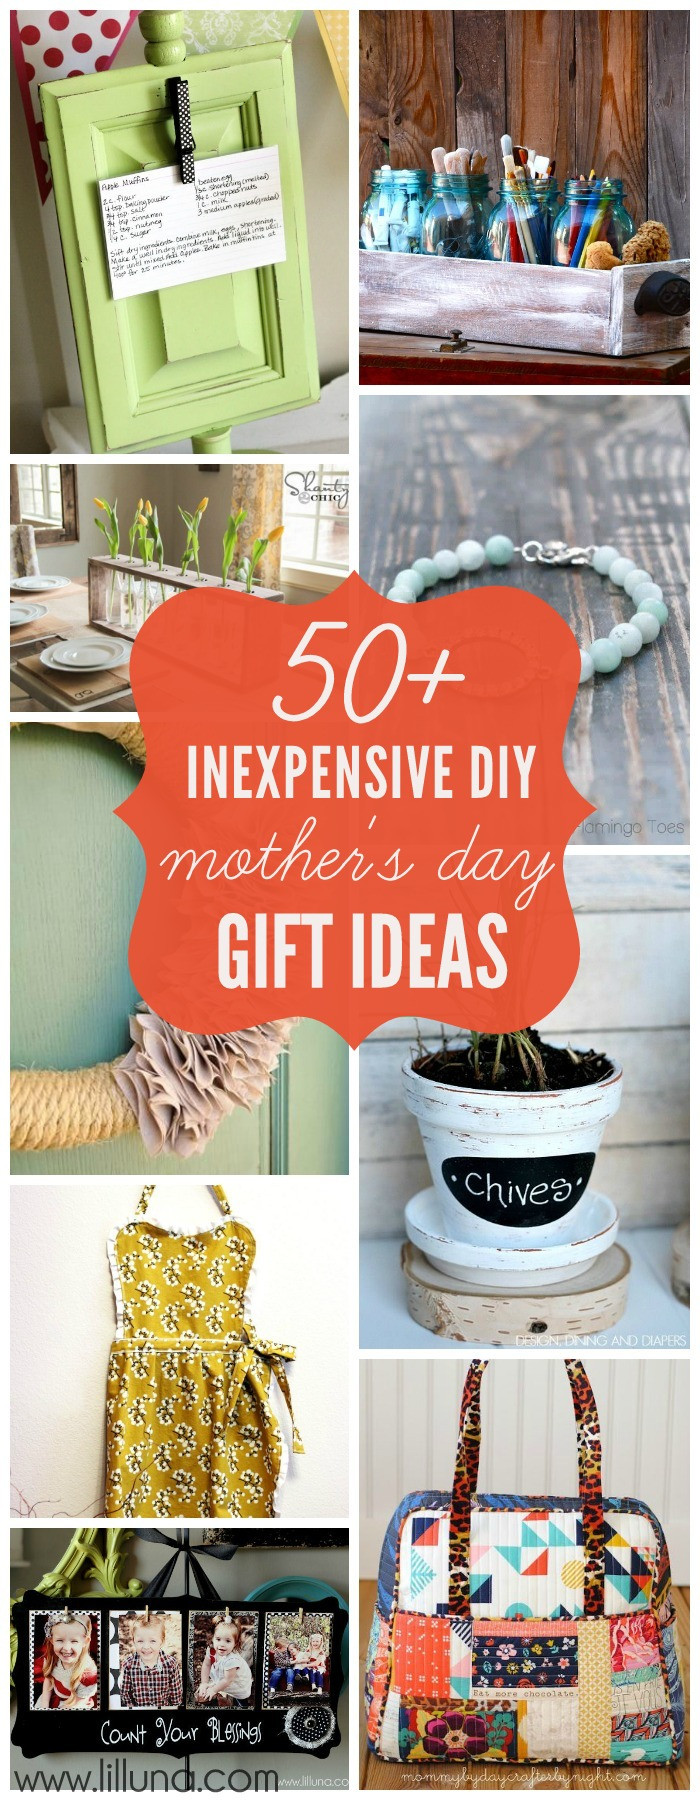 Cheap DIY Gifts
 Recipe for Love Prints